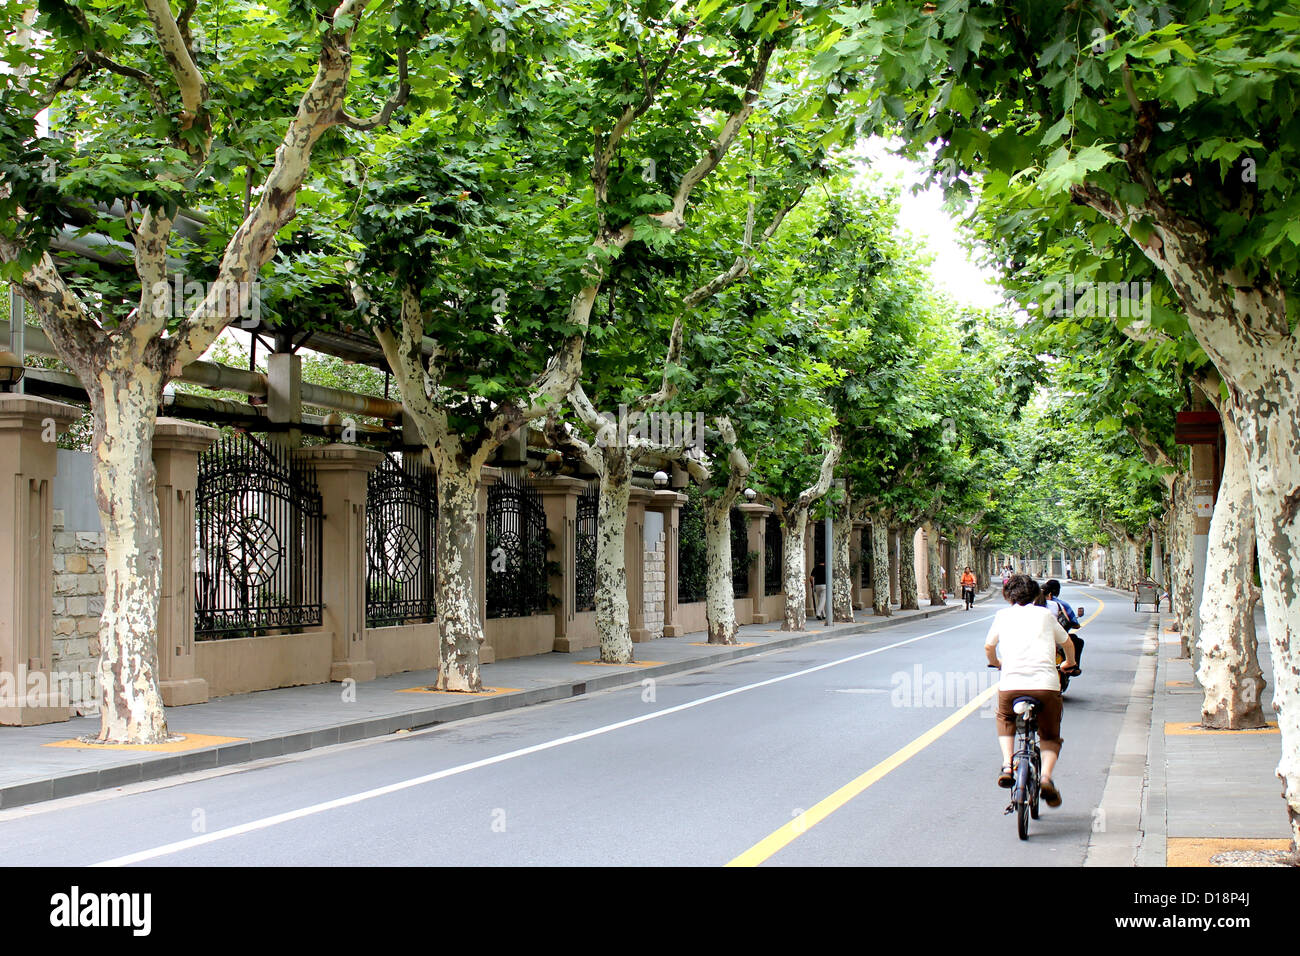 The former French Concession tree-lined streets in Shanghai, China Stock Photo